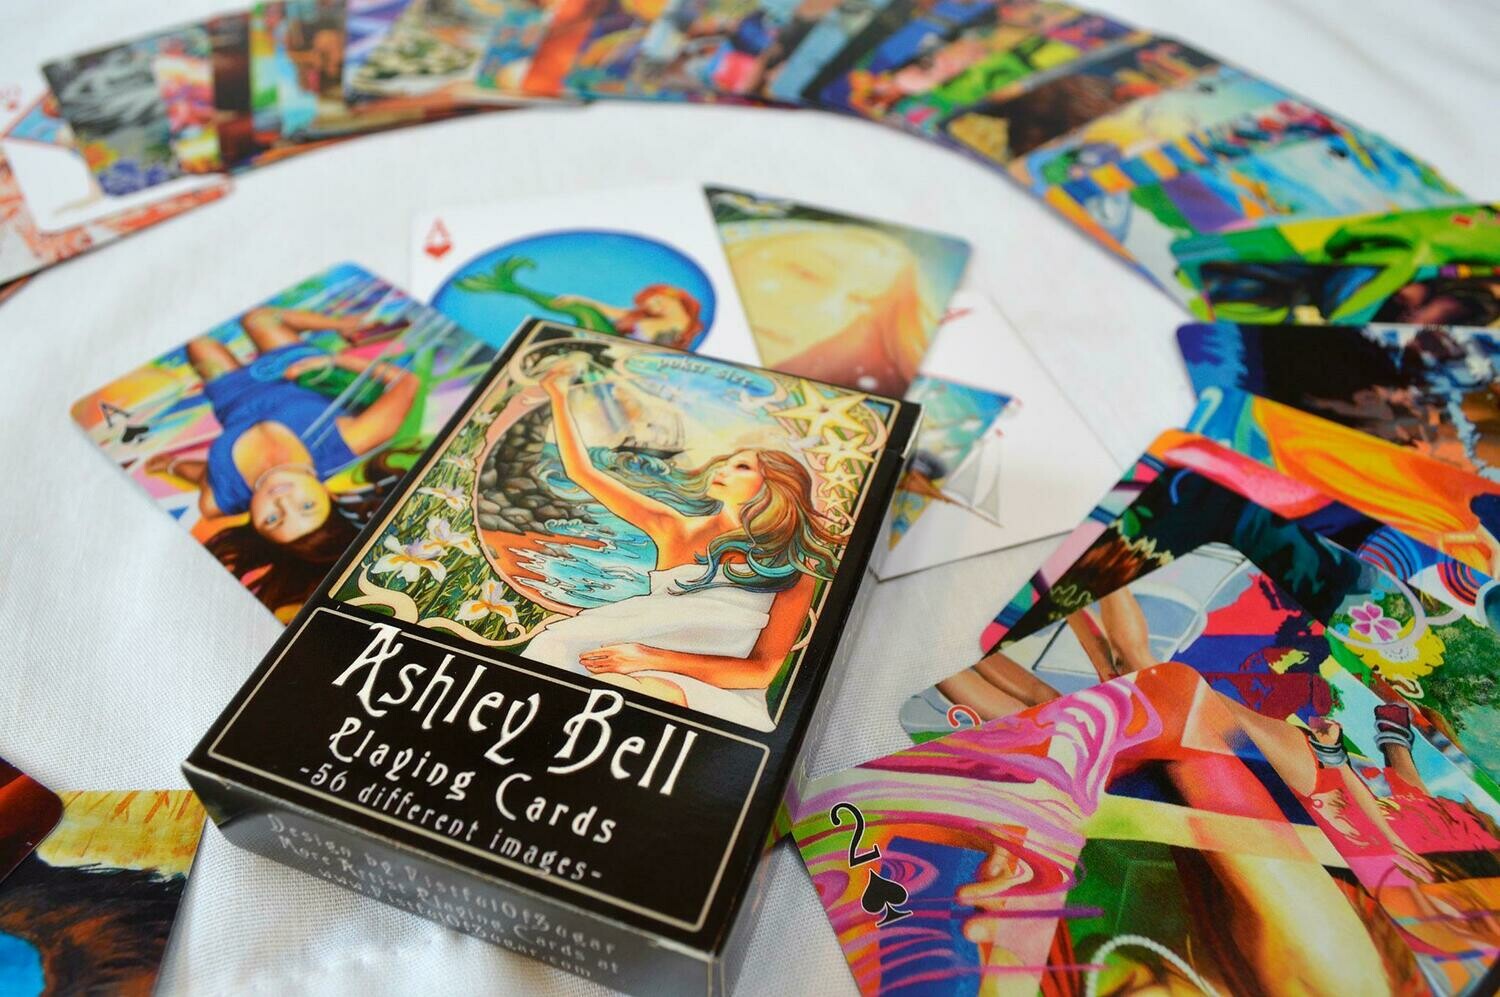 Playing Cards, Ashley Bell Art Cards